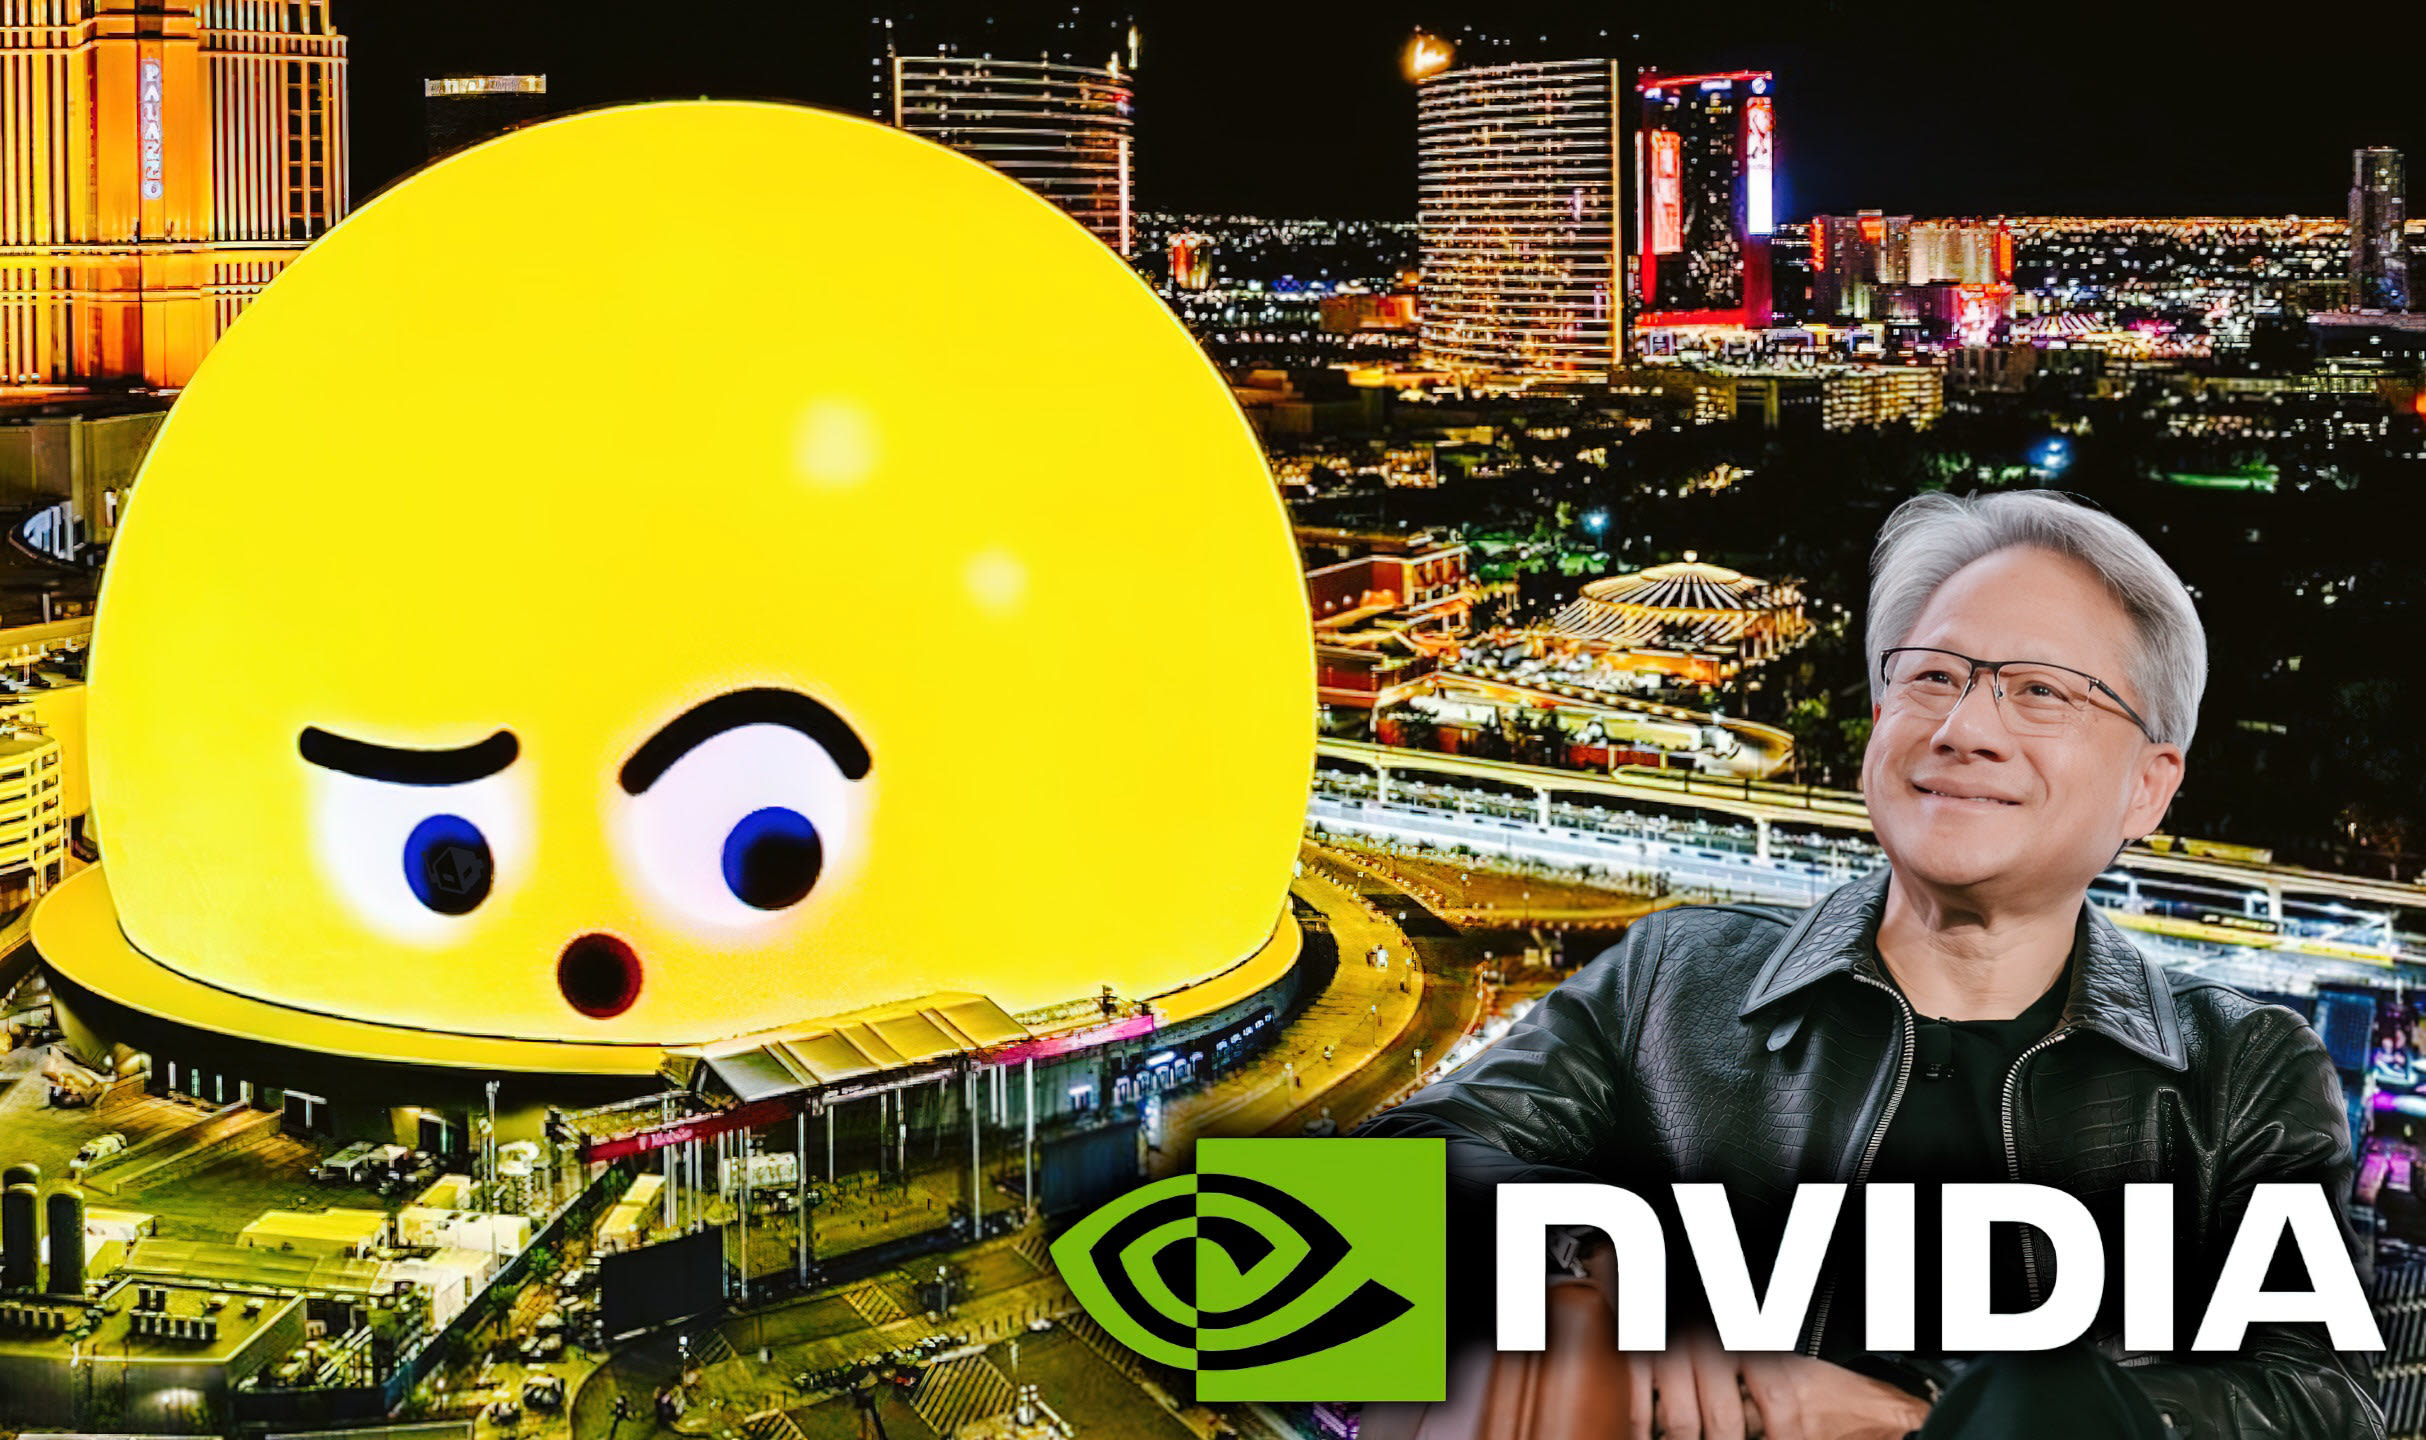 NVIDIA Powers The Iconic Vegas Sphere With 150 RTX A6000 GPUs, 1.2 Million Programmable LEDs